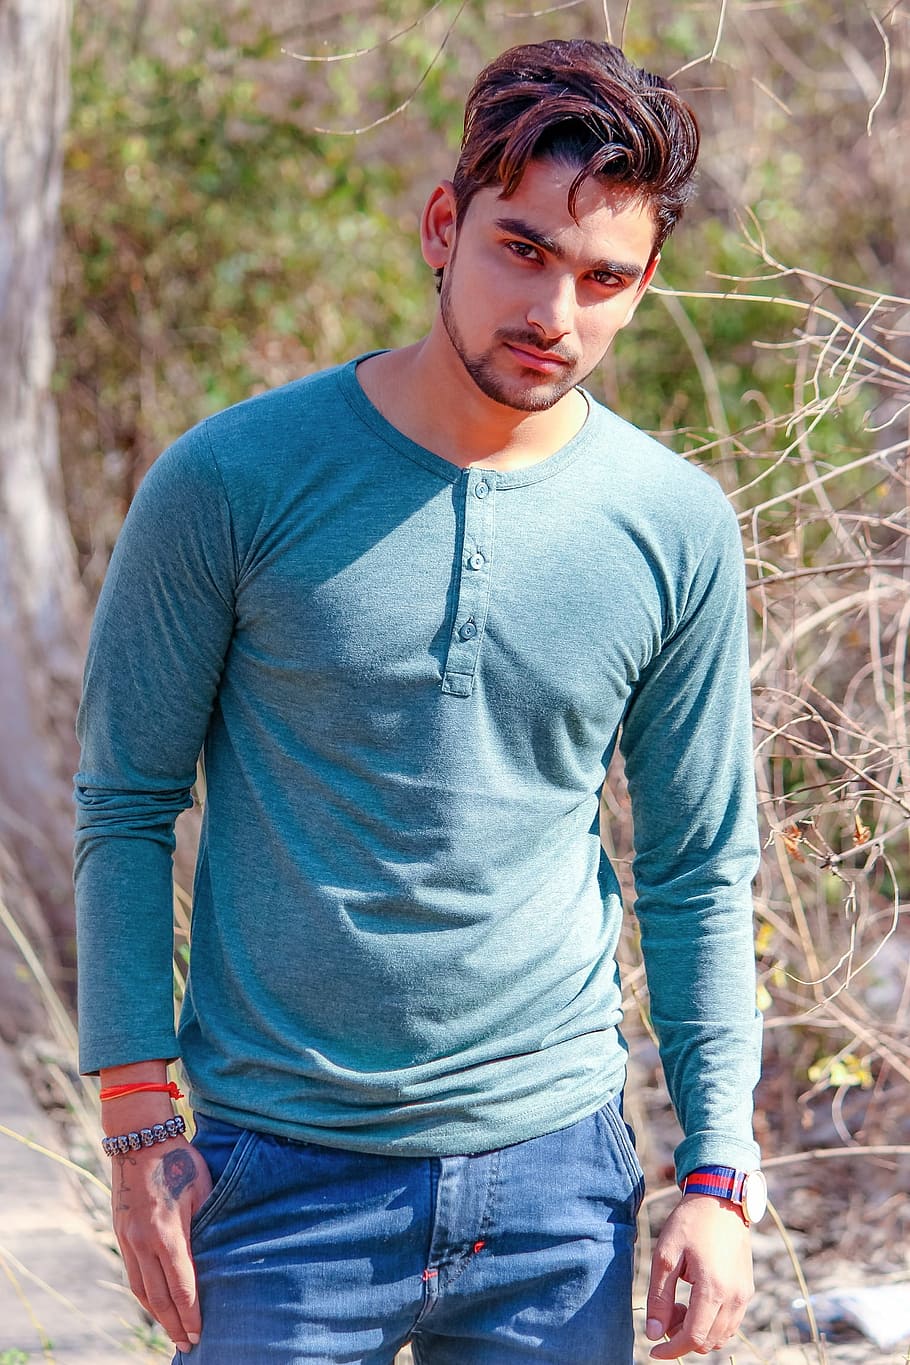 man wearing blue Henley shirt, india, male model, outdoors, casual clothing